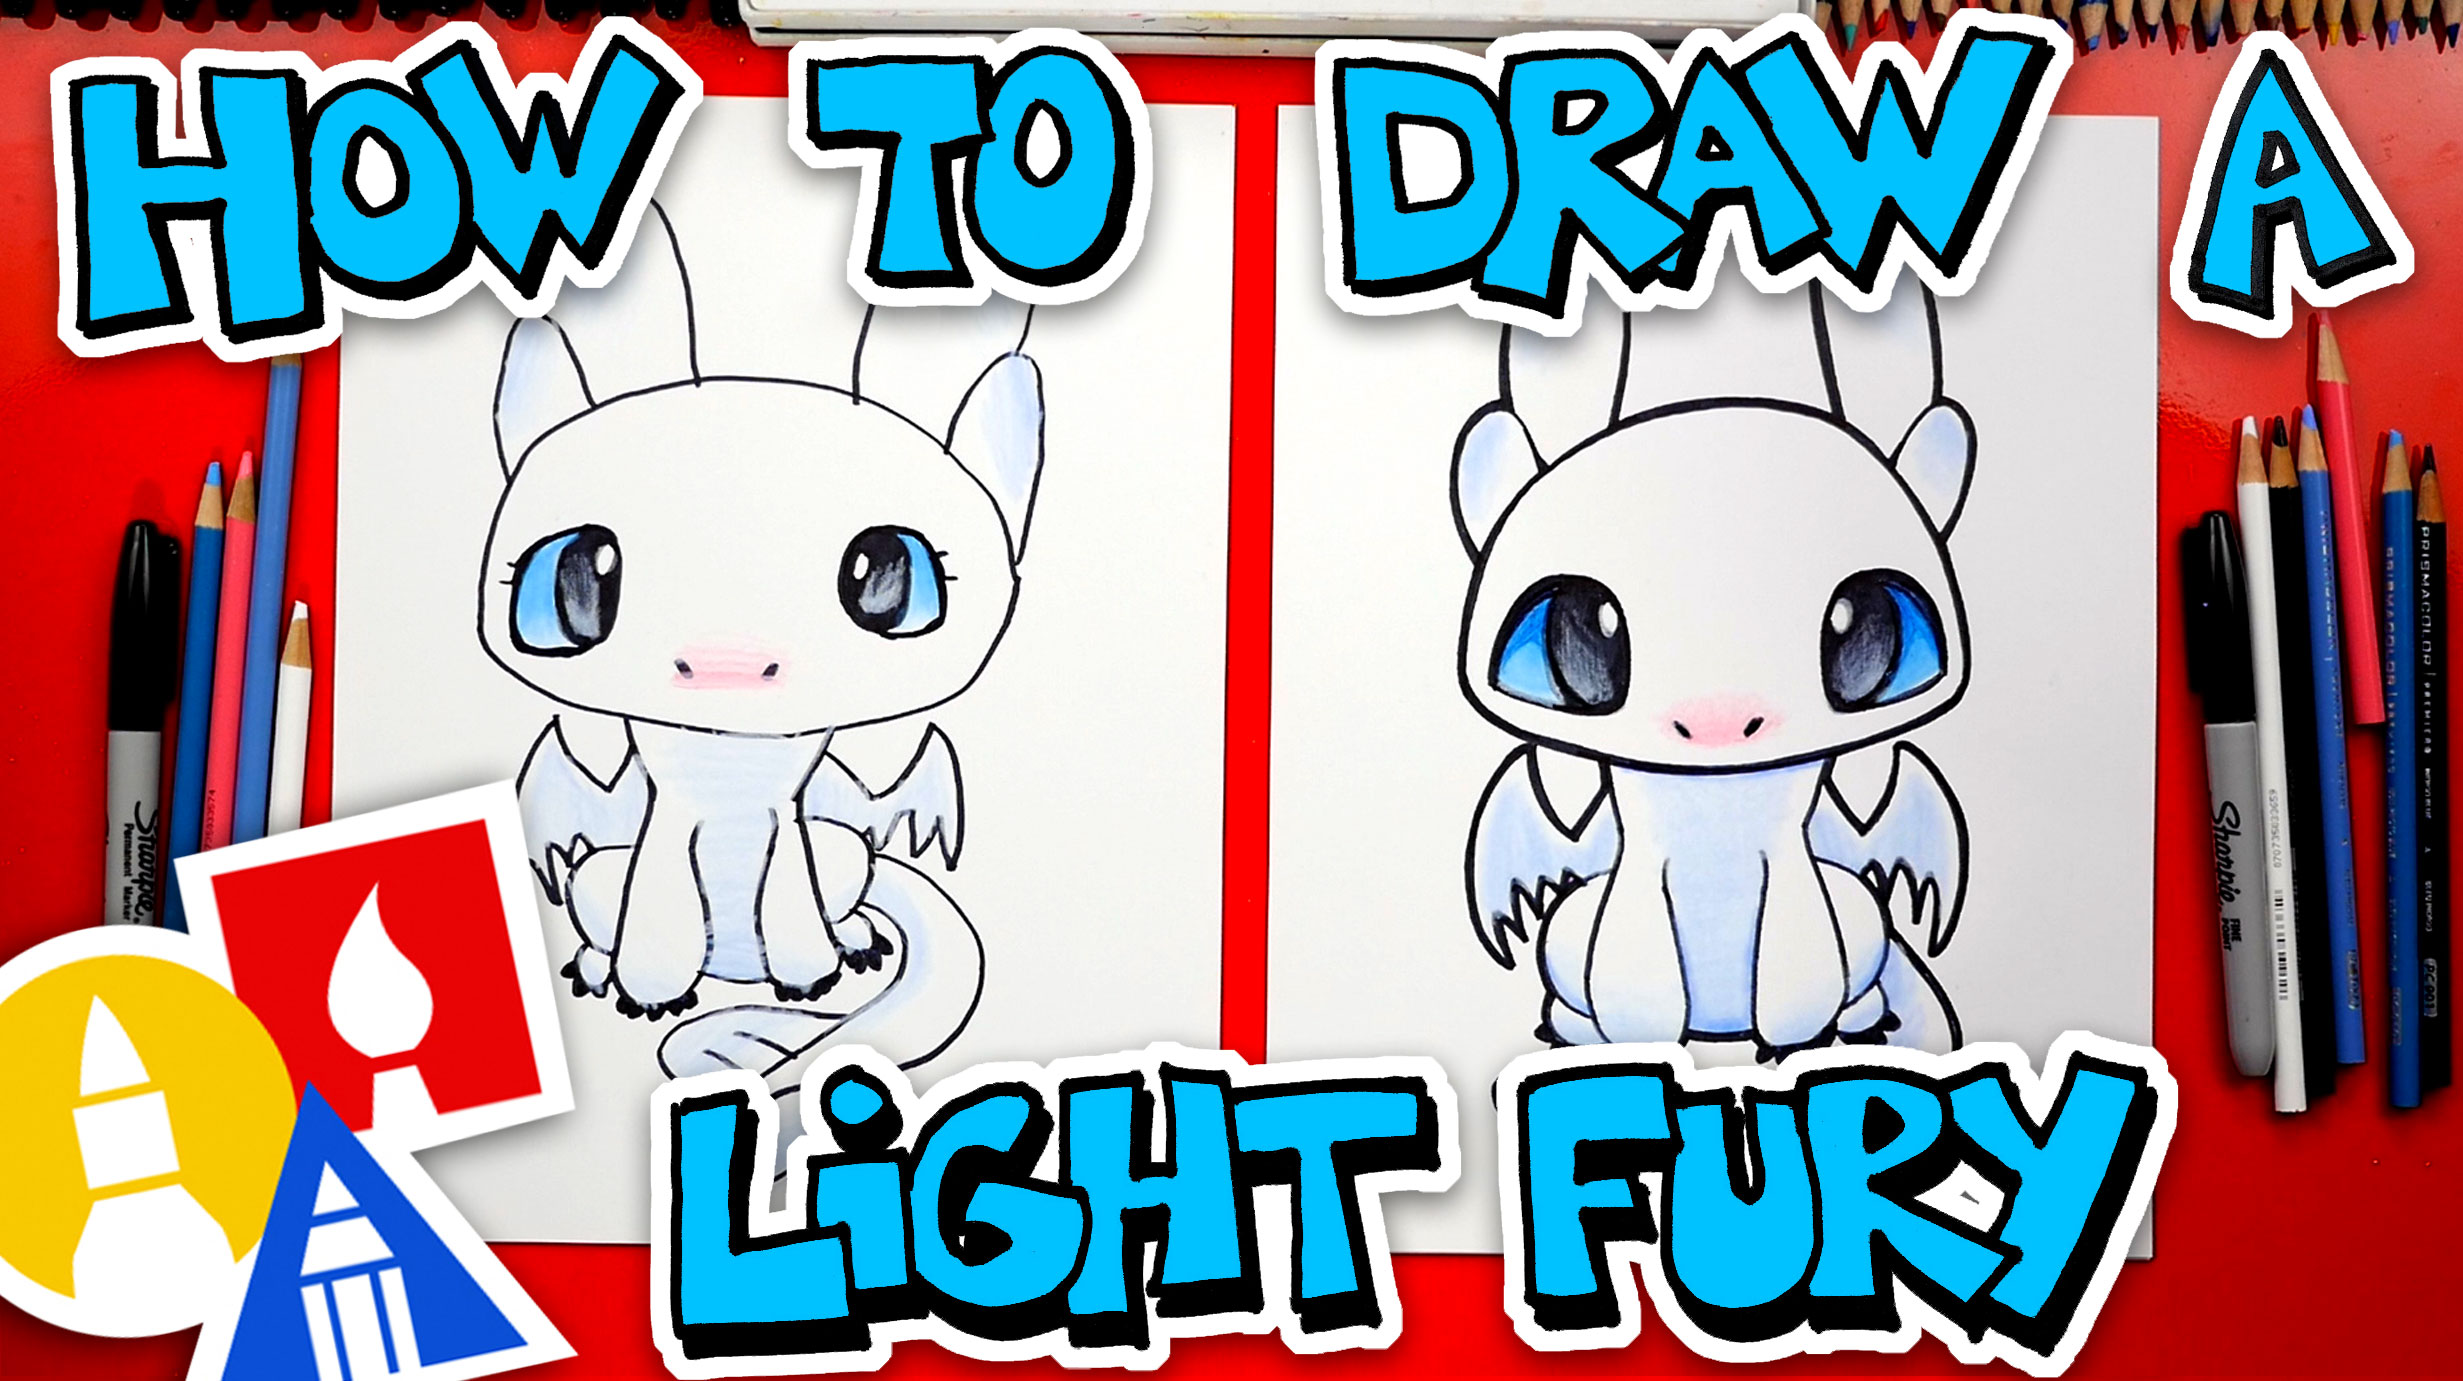 How To Draw A Light Fury From How To Train Your Dragon - Art For Kids Hub